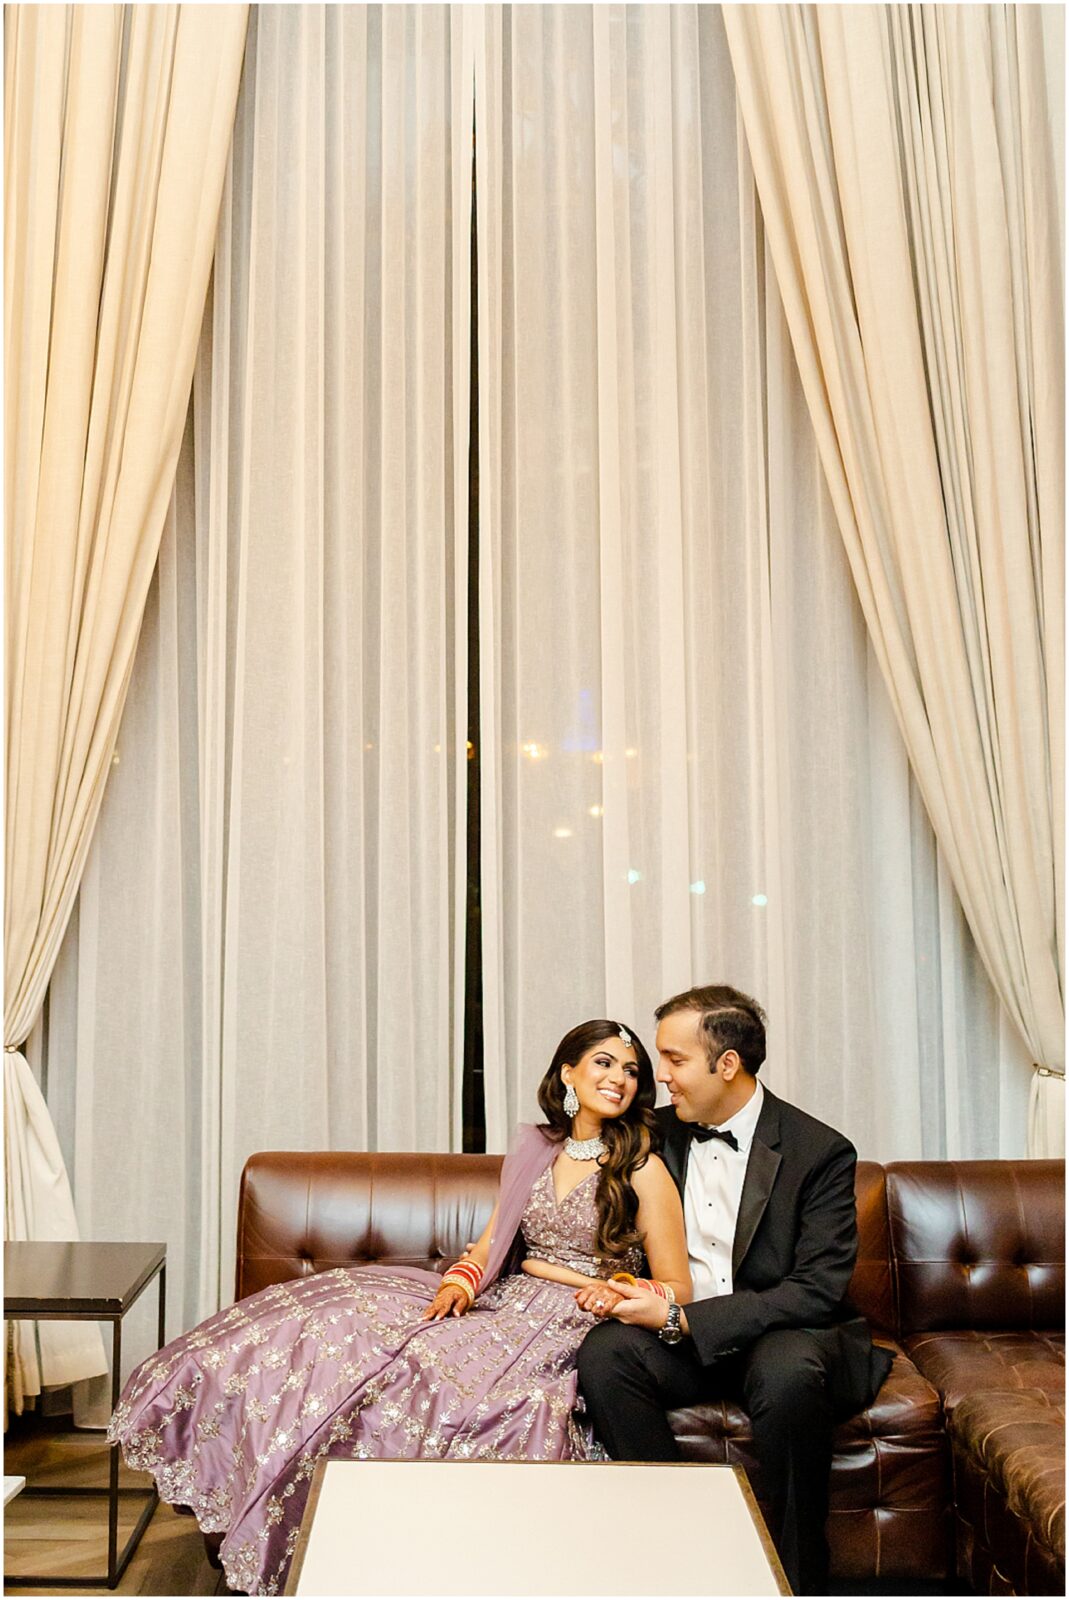 editorial style indian wedding photos by kc and stl wedding photographer 